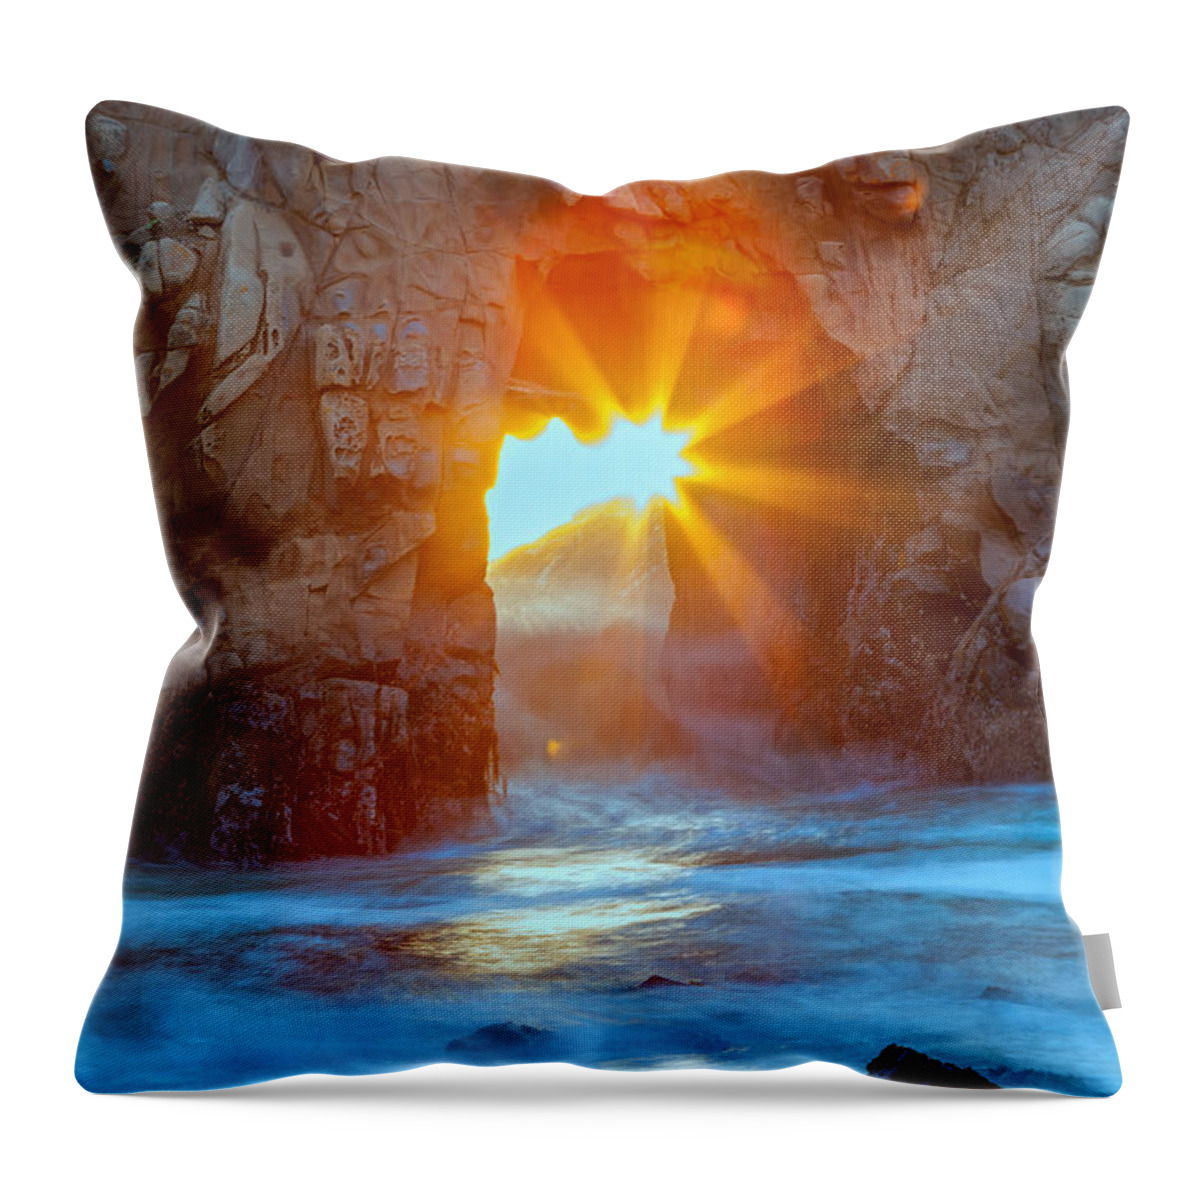 Landscape Throw Pillow featuring the photograph The Shining Star by Jonathan Nguyen